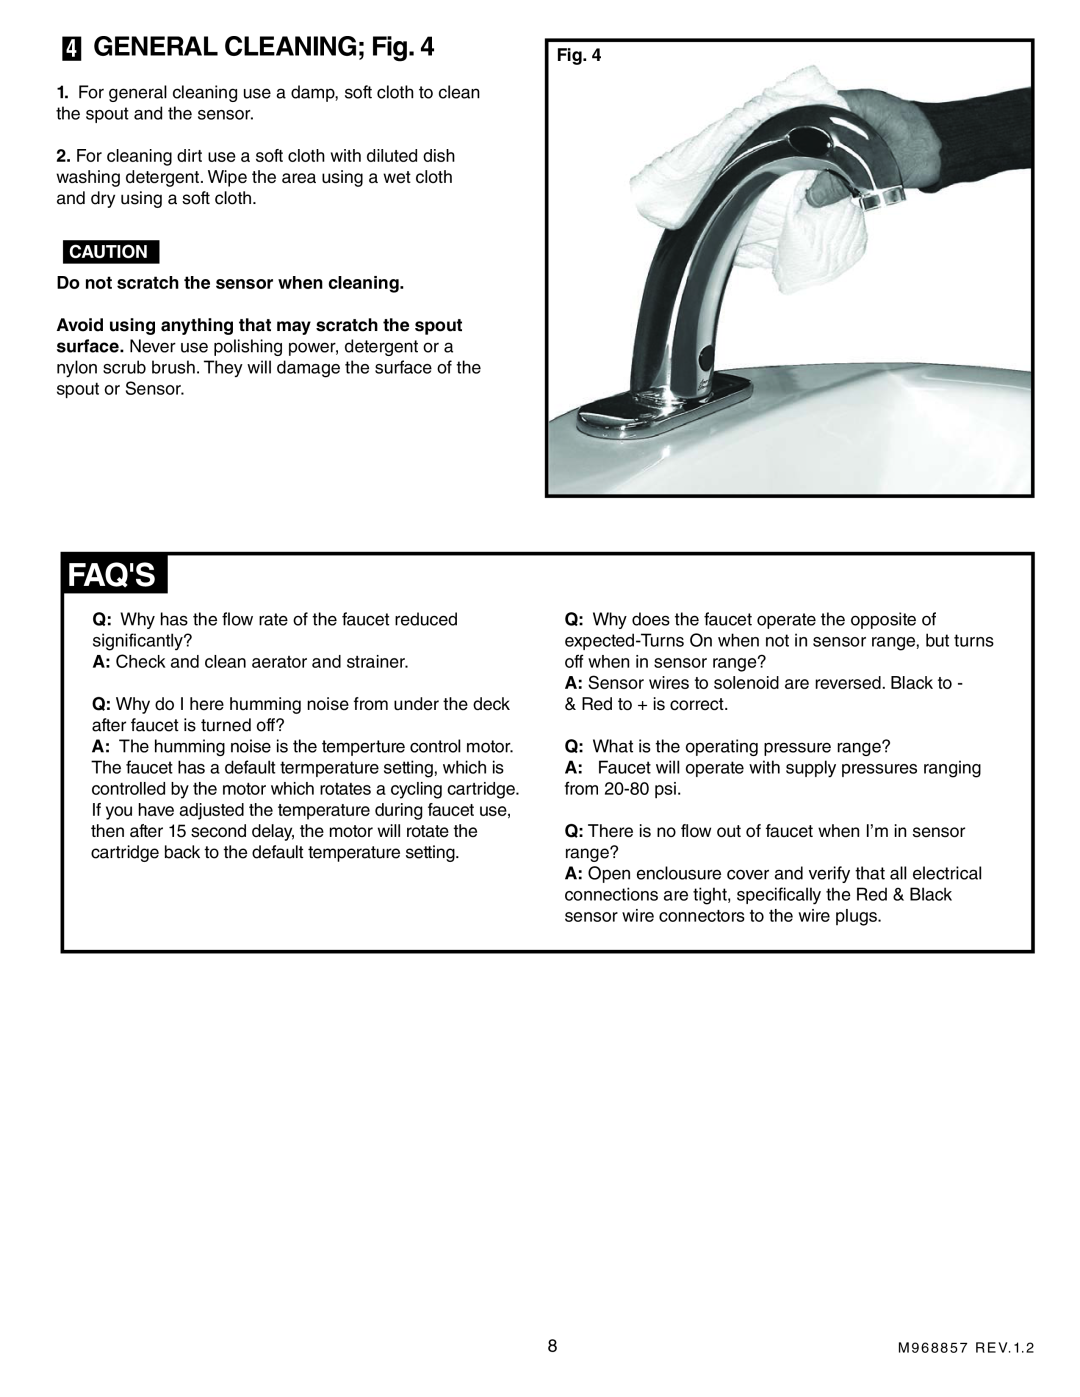 American Standard 6058.105, 6058.102 installation instructions Faqs, 4GENERAL CLEANING Fig 